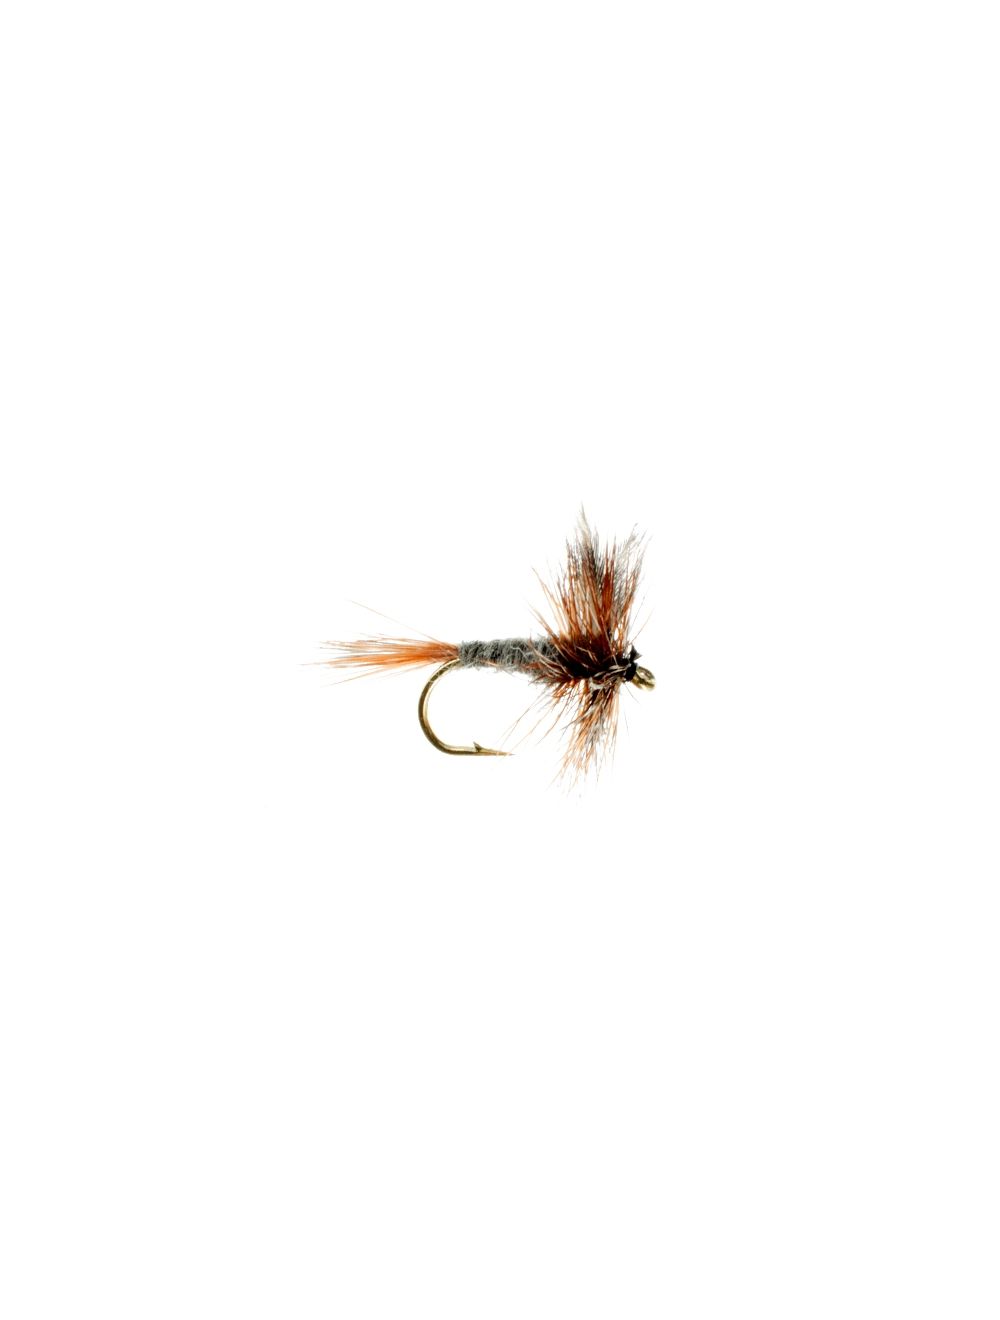 Dry Trout Flies Great Dry Fly X3 Adams Fly Fishing 